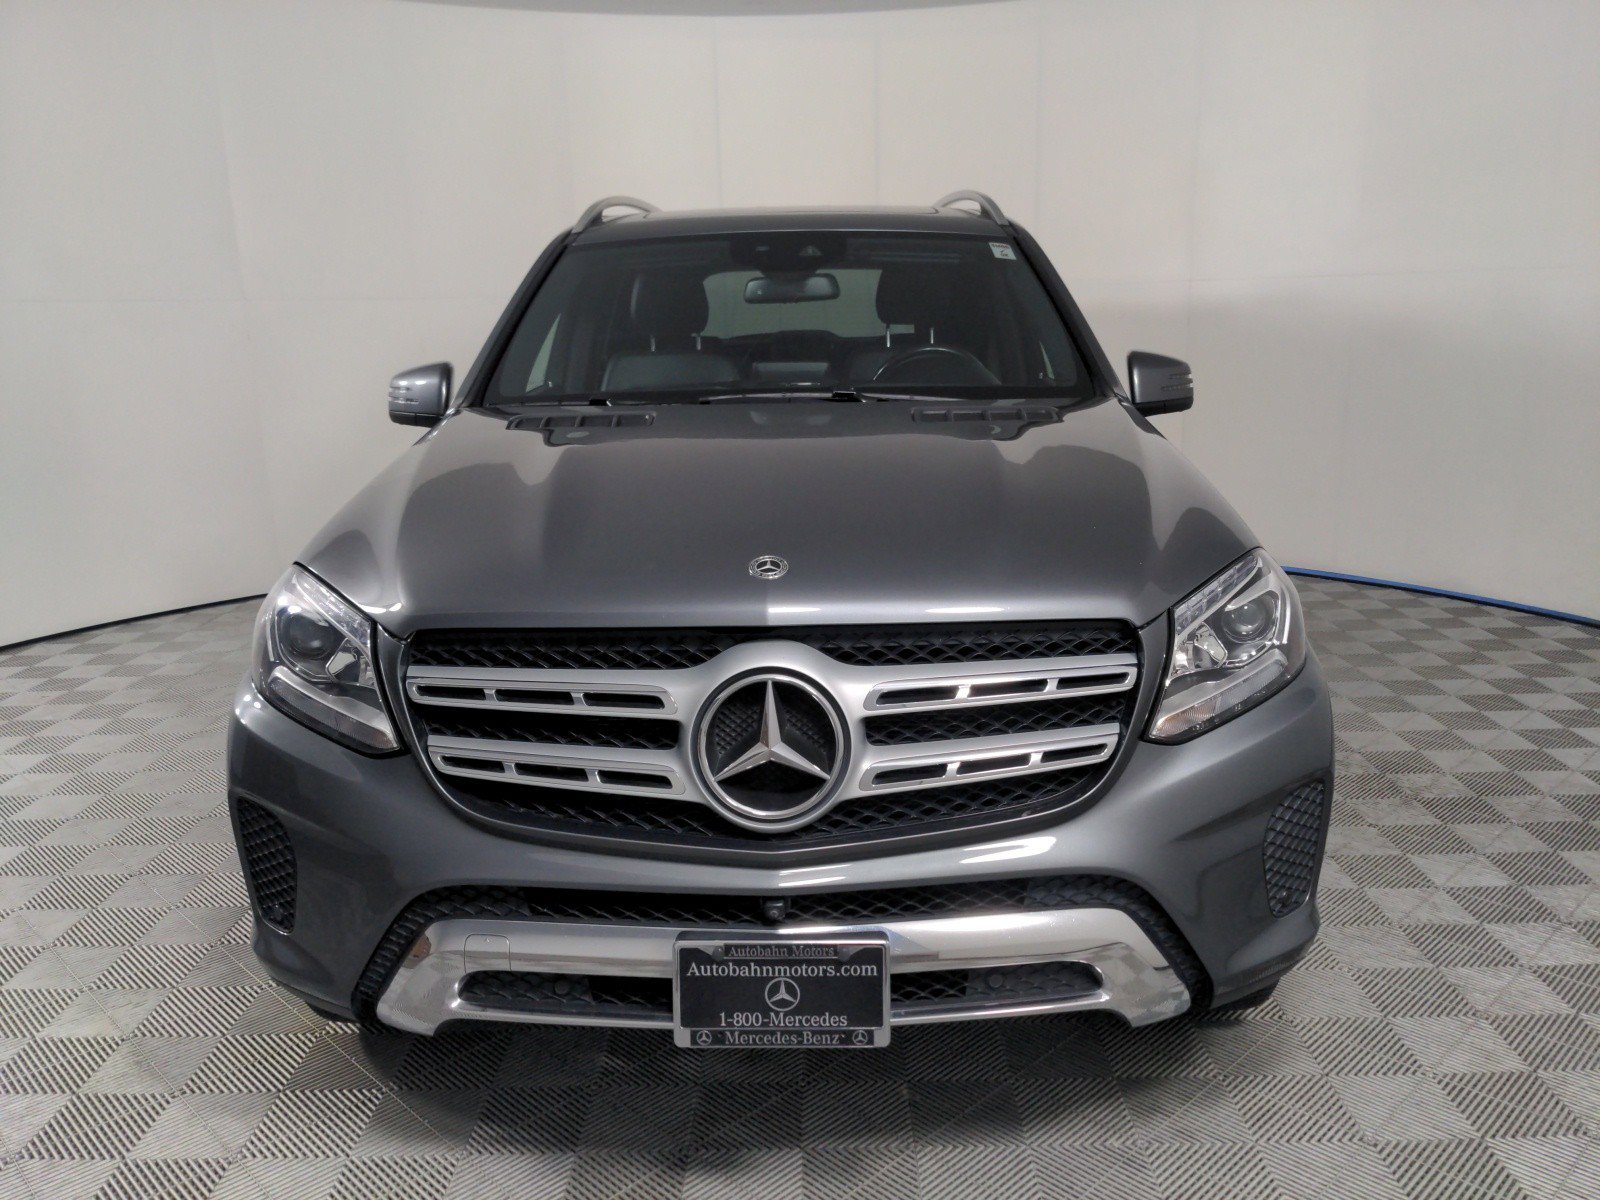 Used 2019 Mercedes-Benz GLS-Class GLS450 with VIN 4JGDF6EEXKB212026 for sale in Belmont, CA